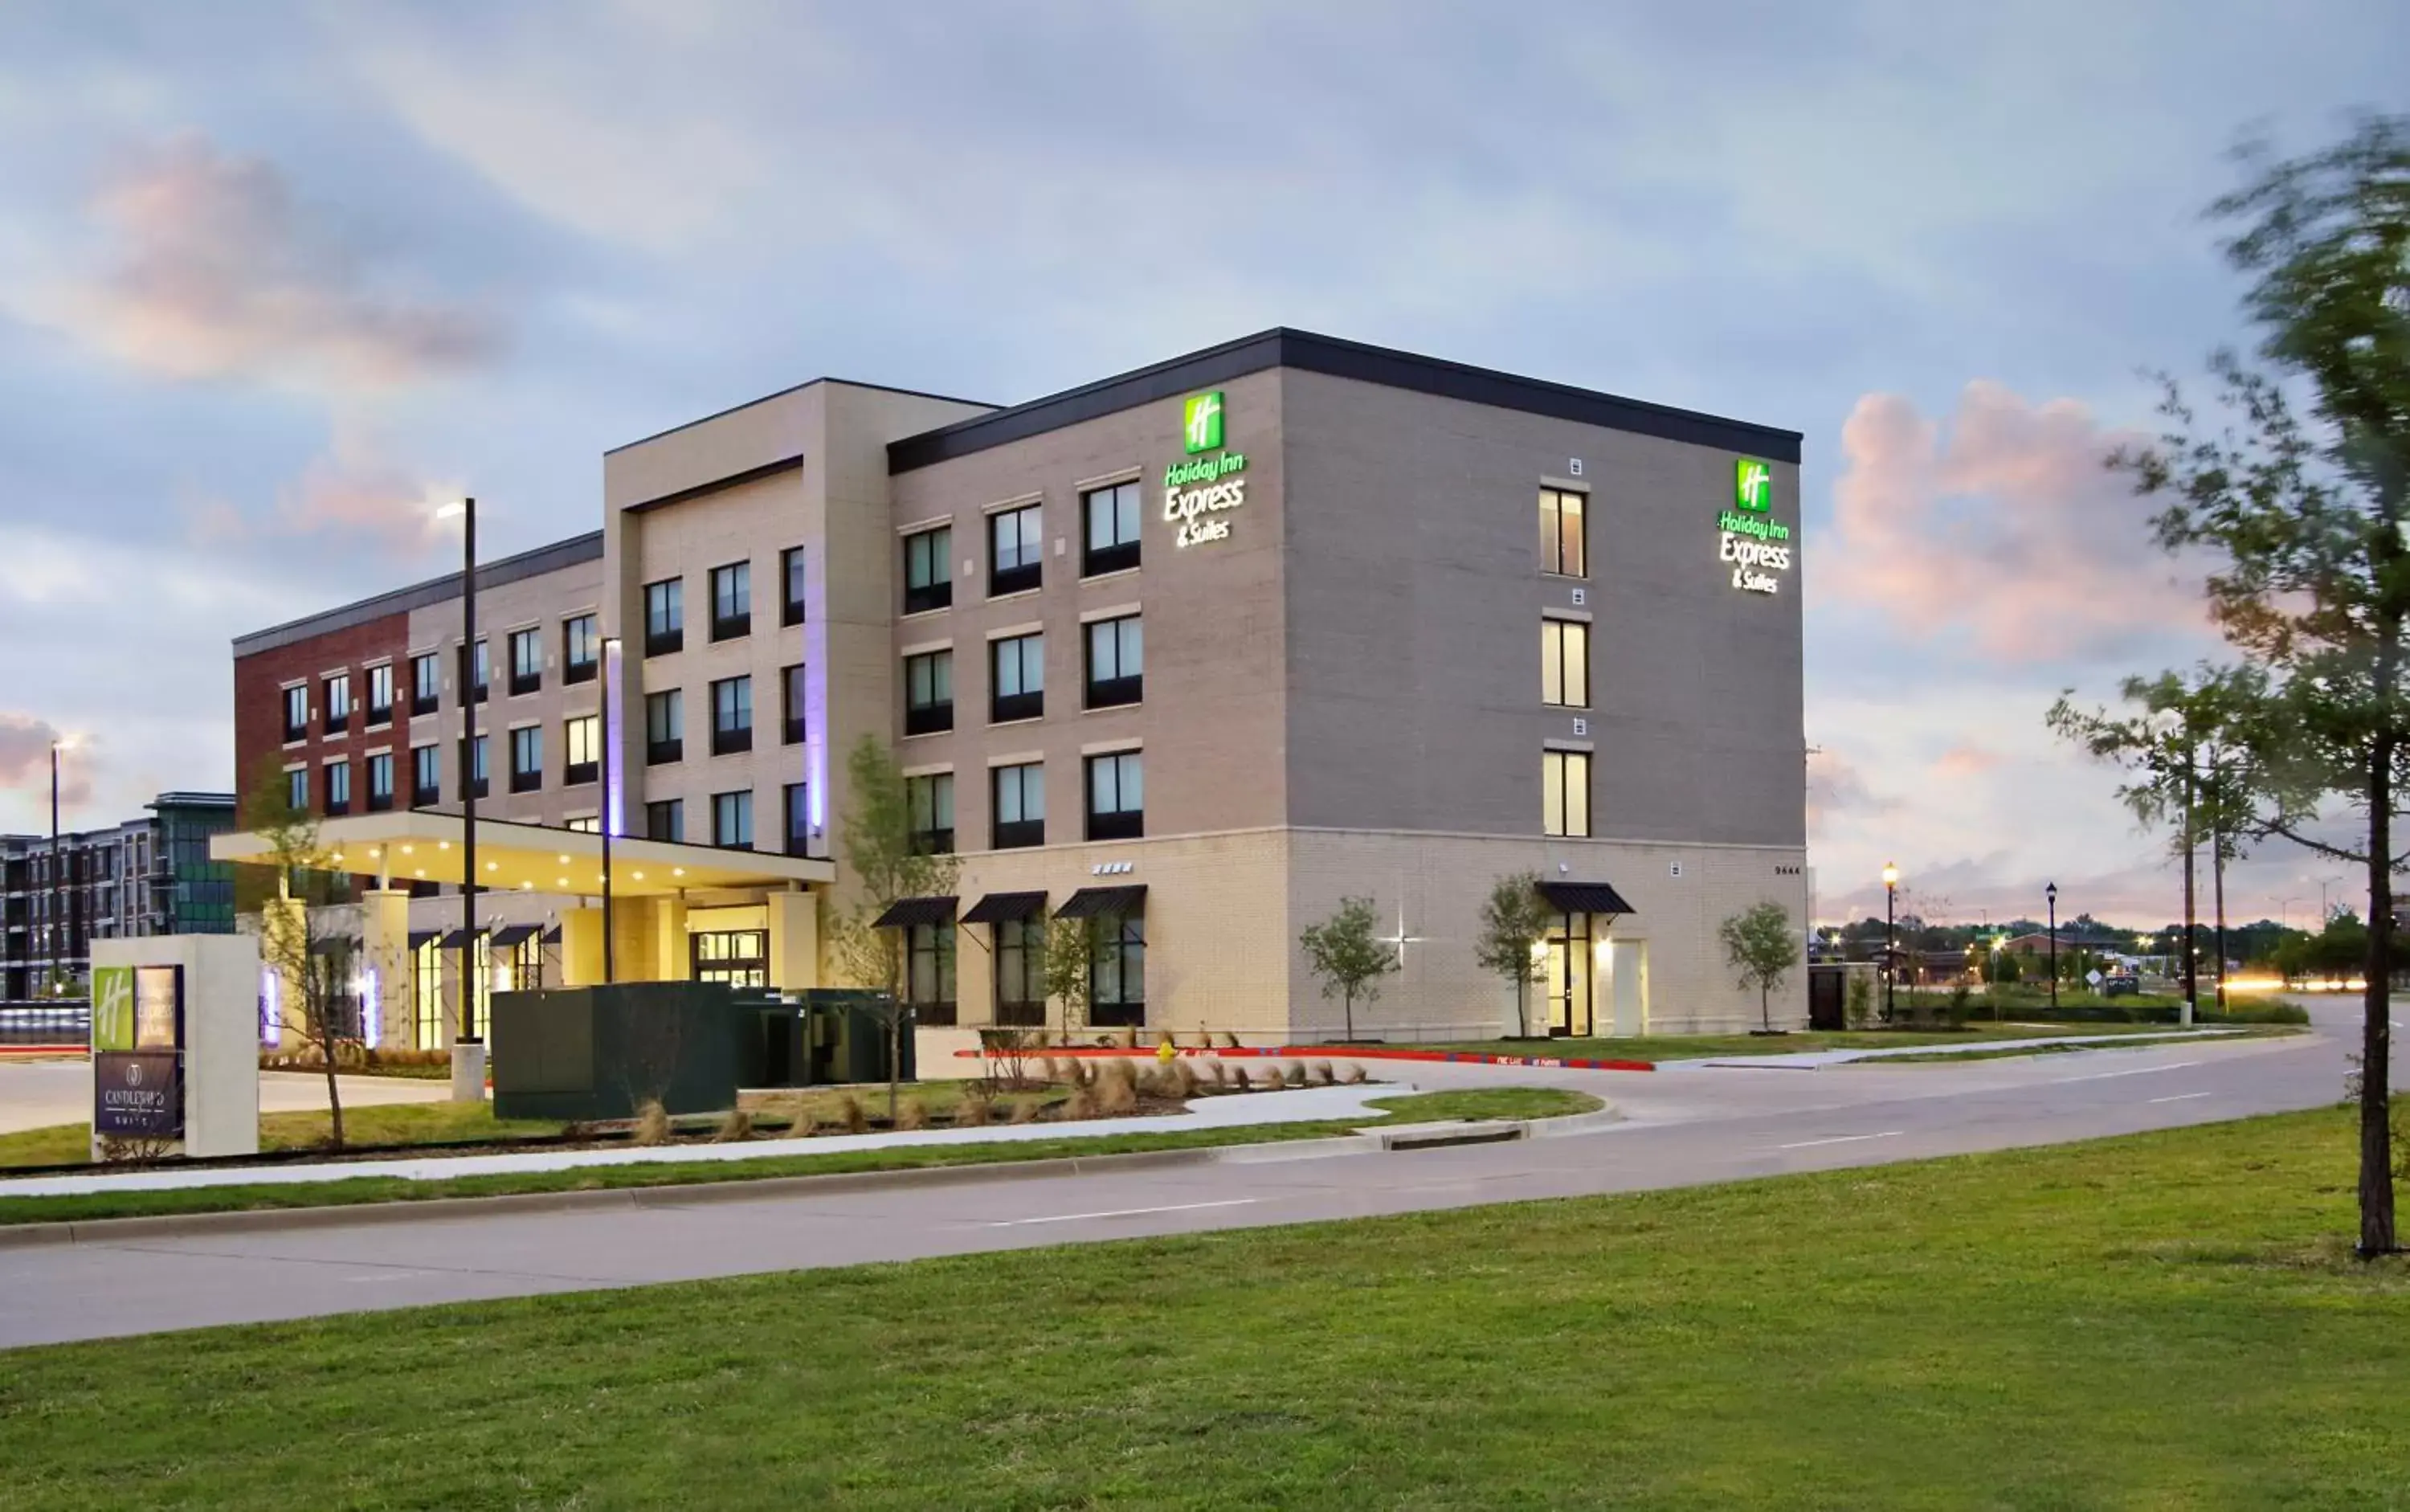 Property building in Holiday Inn Express & Suites - Frisco NW Toyota Stdm, an IHG Hotel